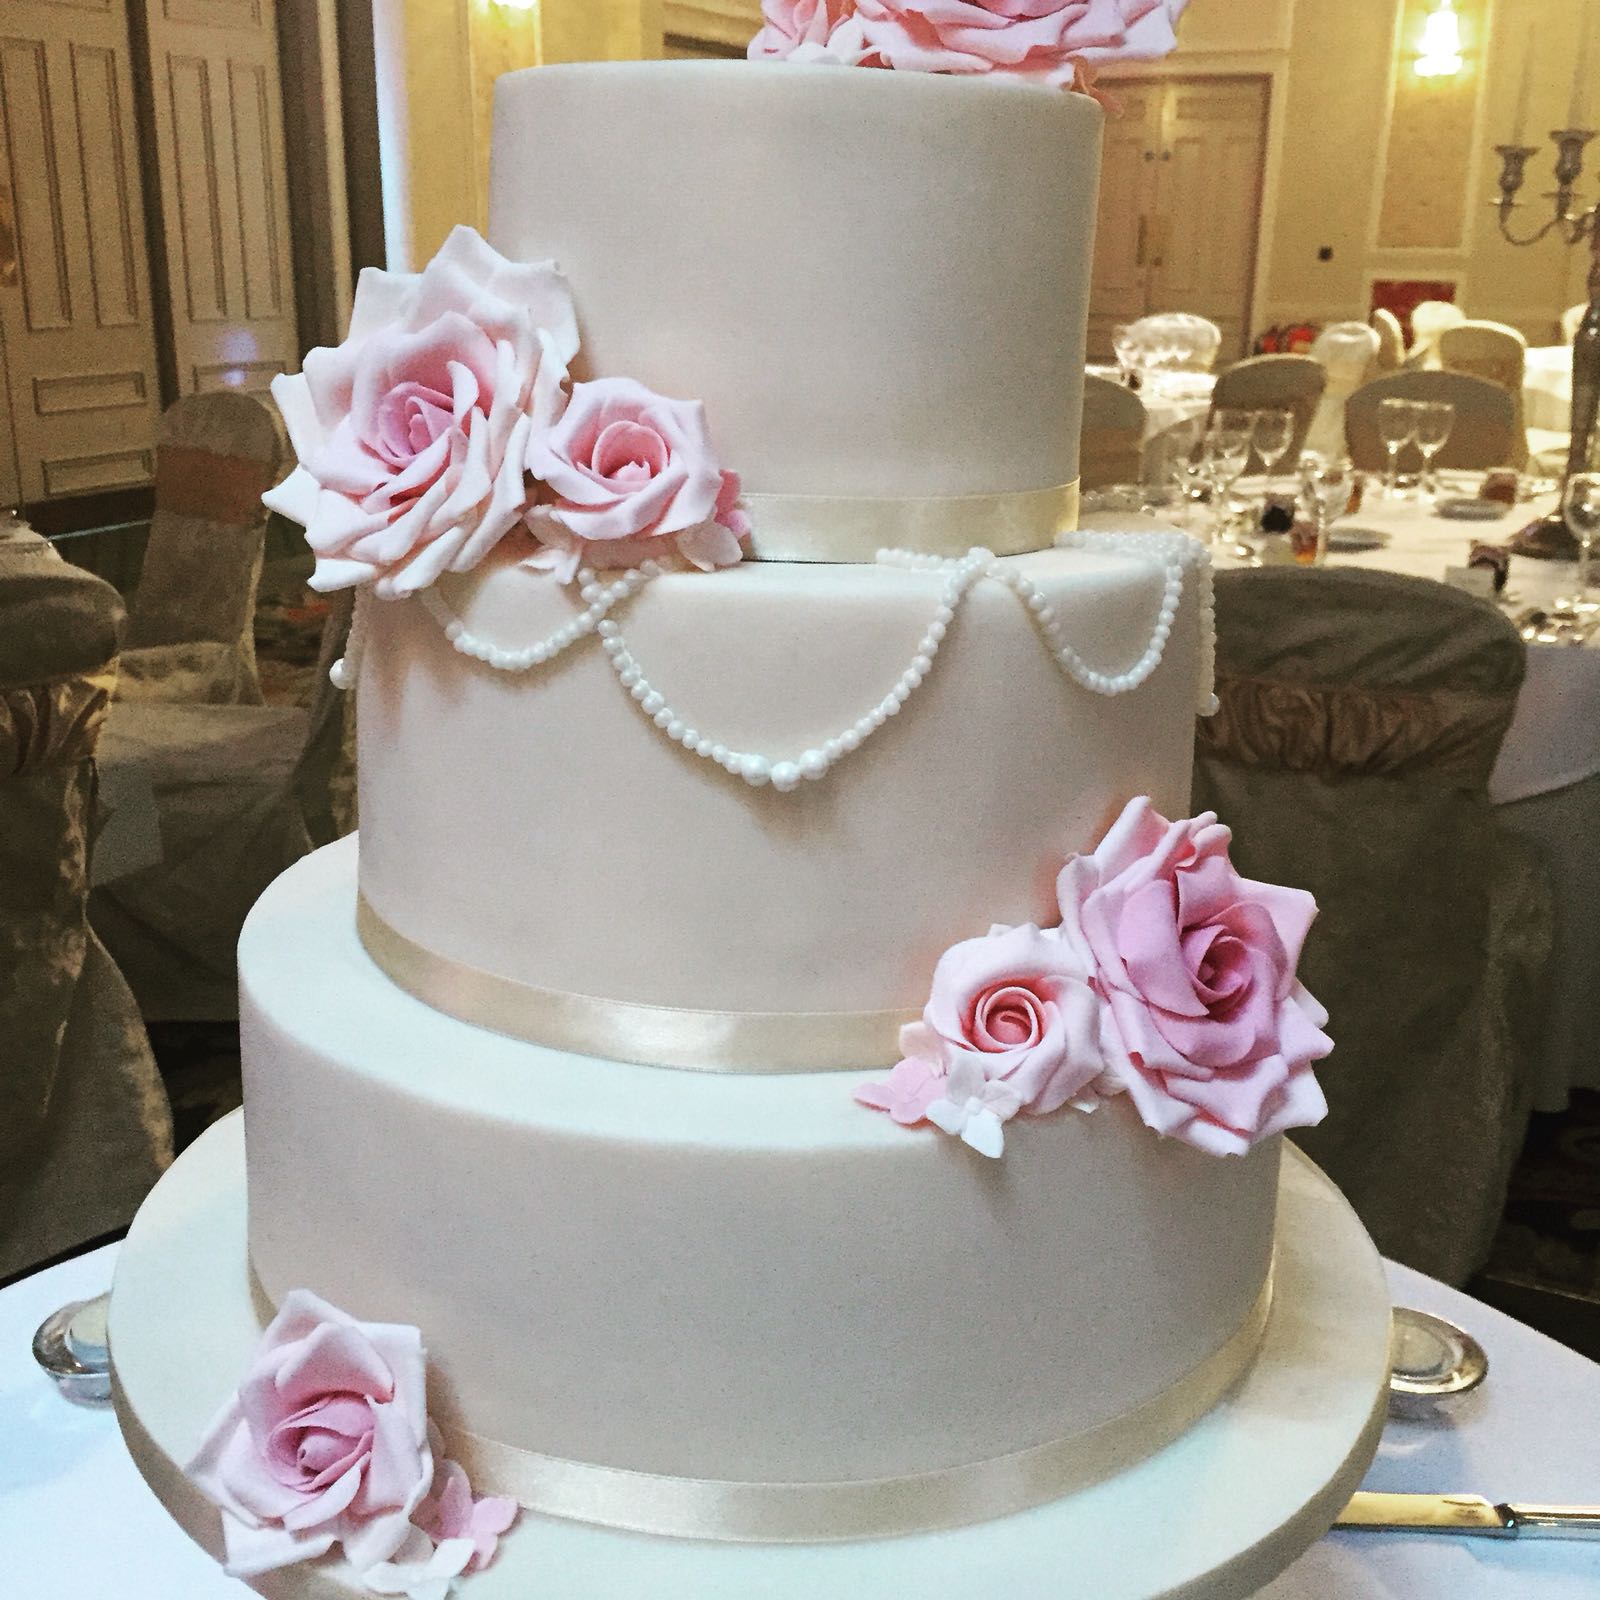 Wedding Cakes and Sweet Tables